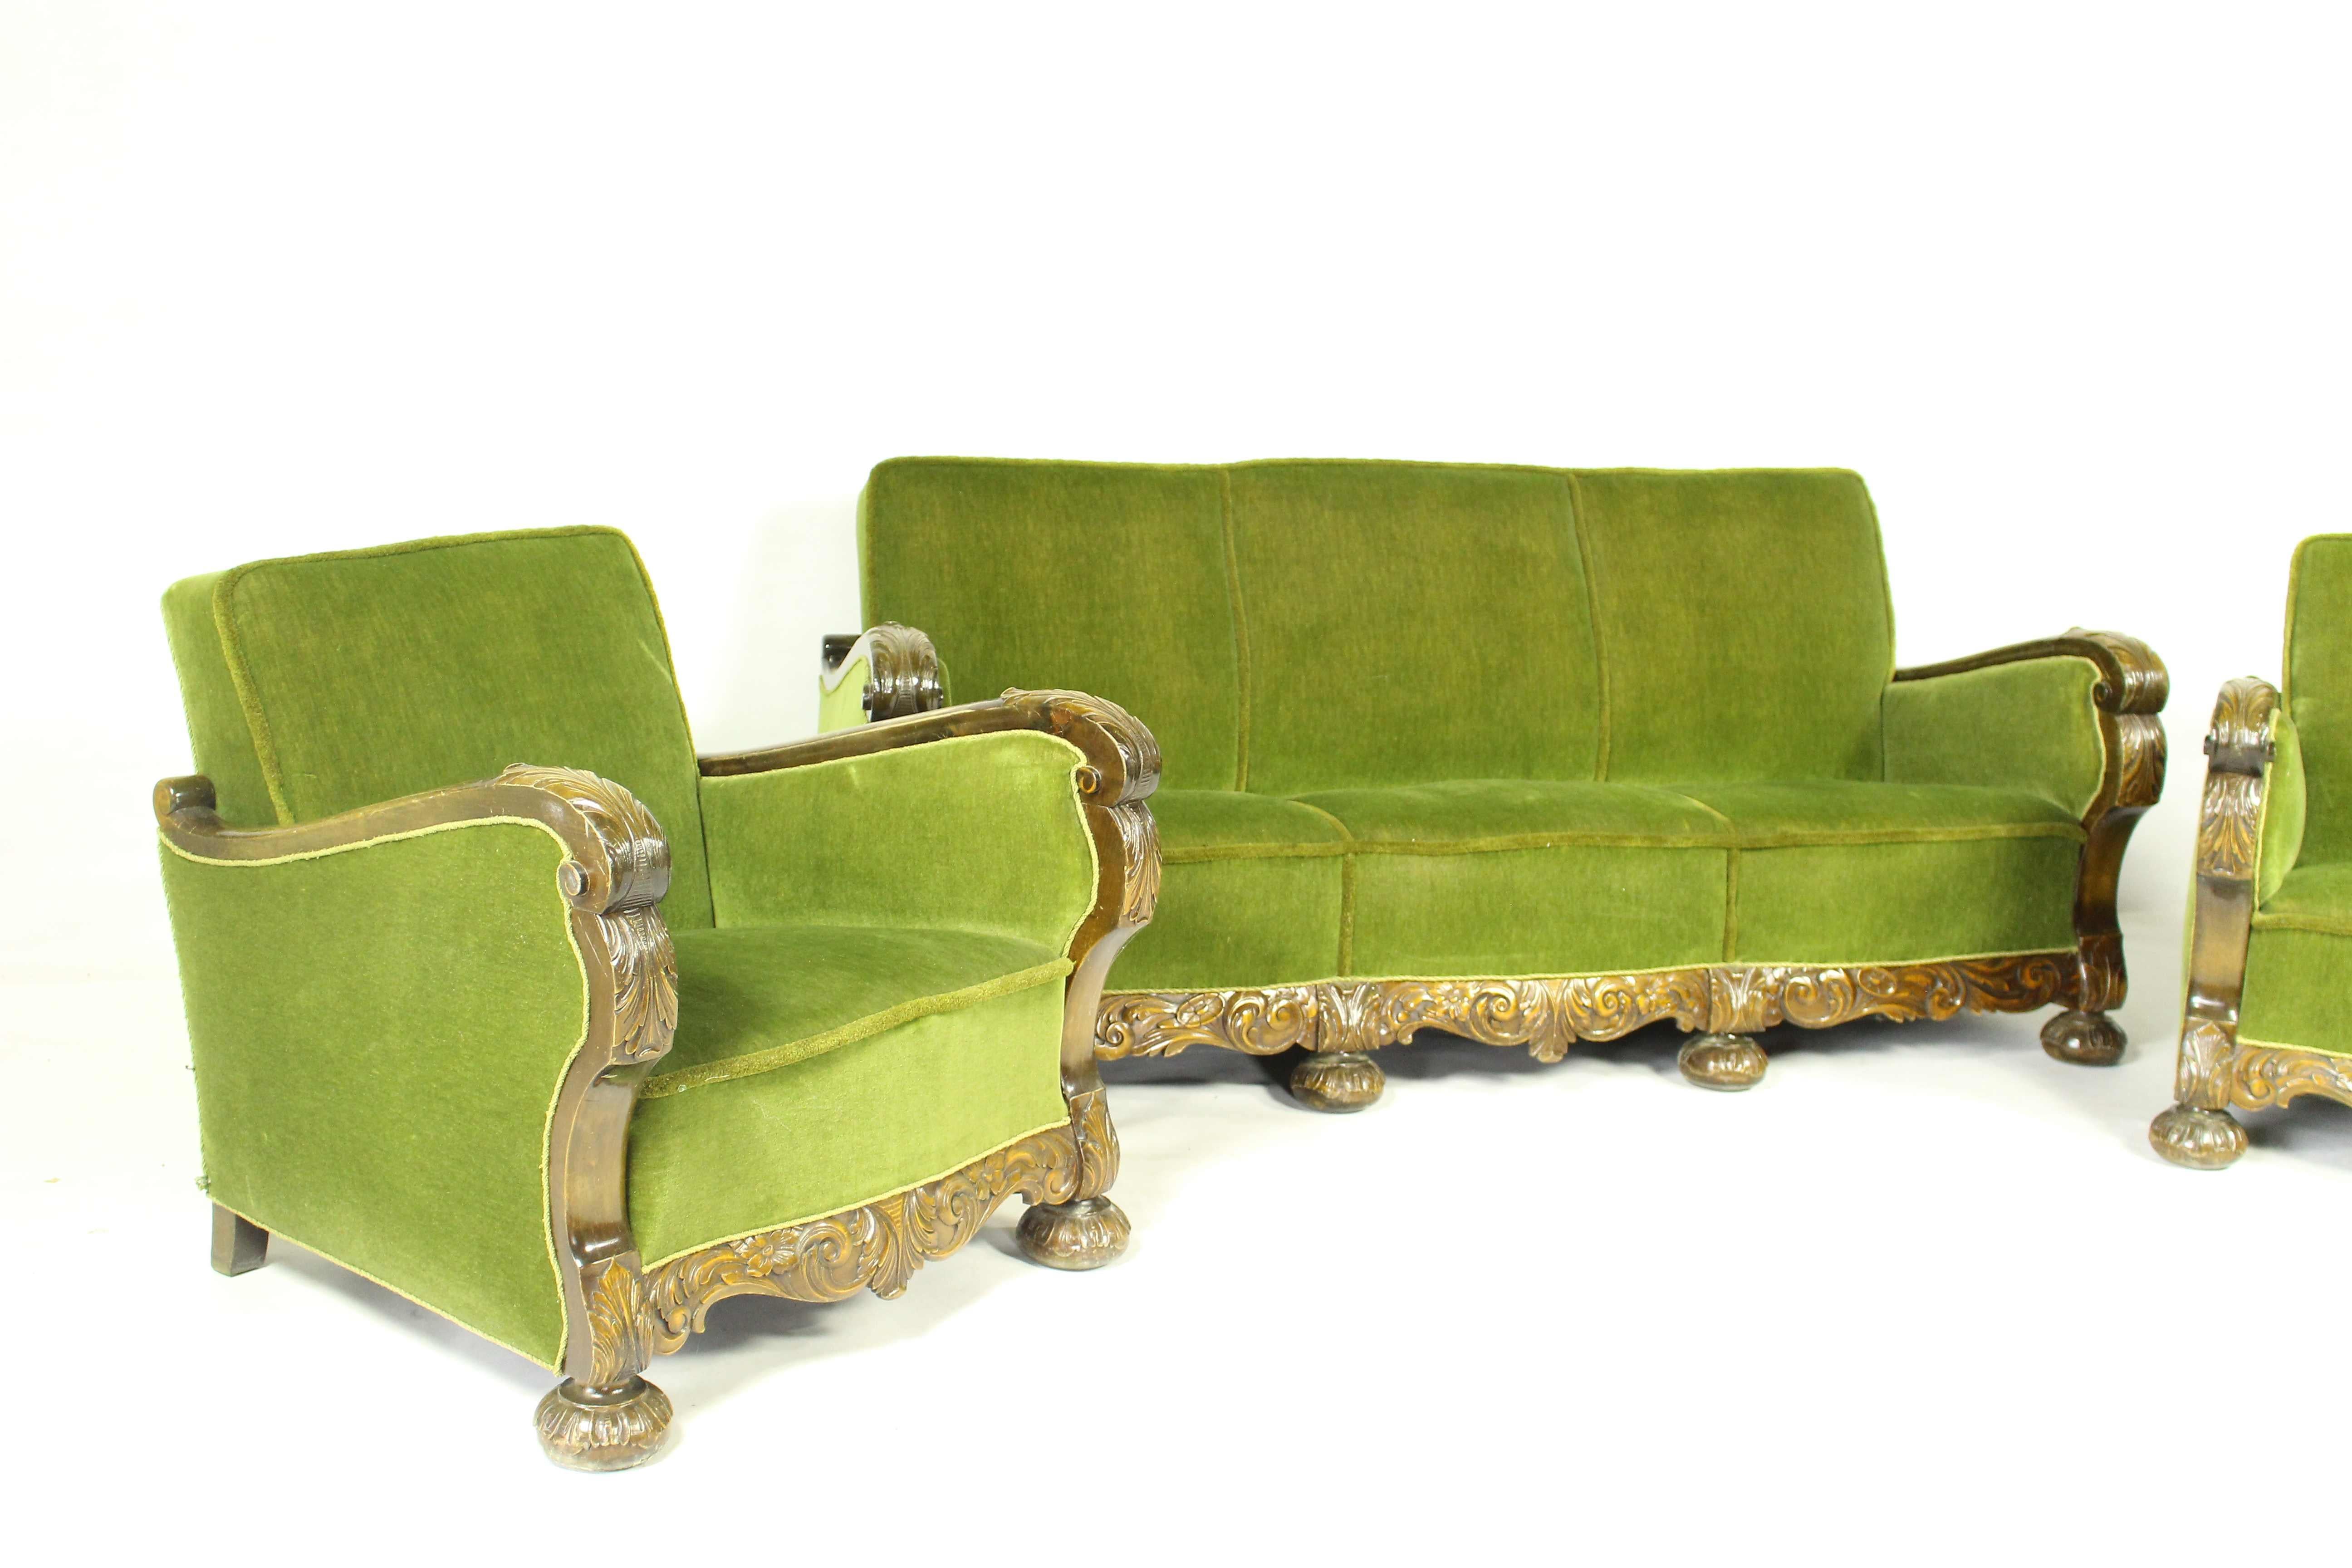 Art Deco style upholstered green velvet sofa and armchairs with wooden armrests and legs.
Upholstered in green velvet (recommended replacement).
Made in Denmark in 20th century.
Seat and back with springs.